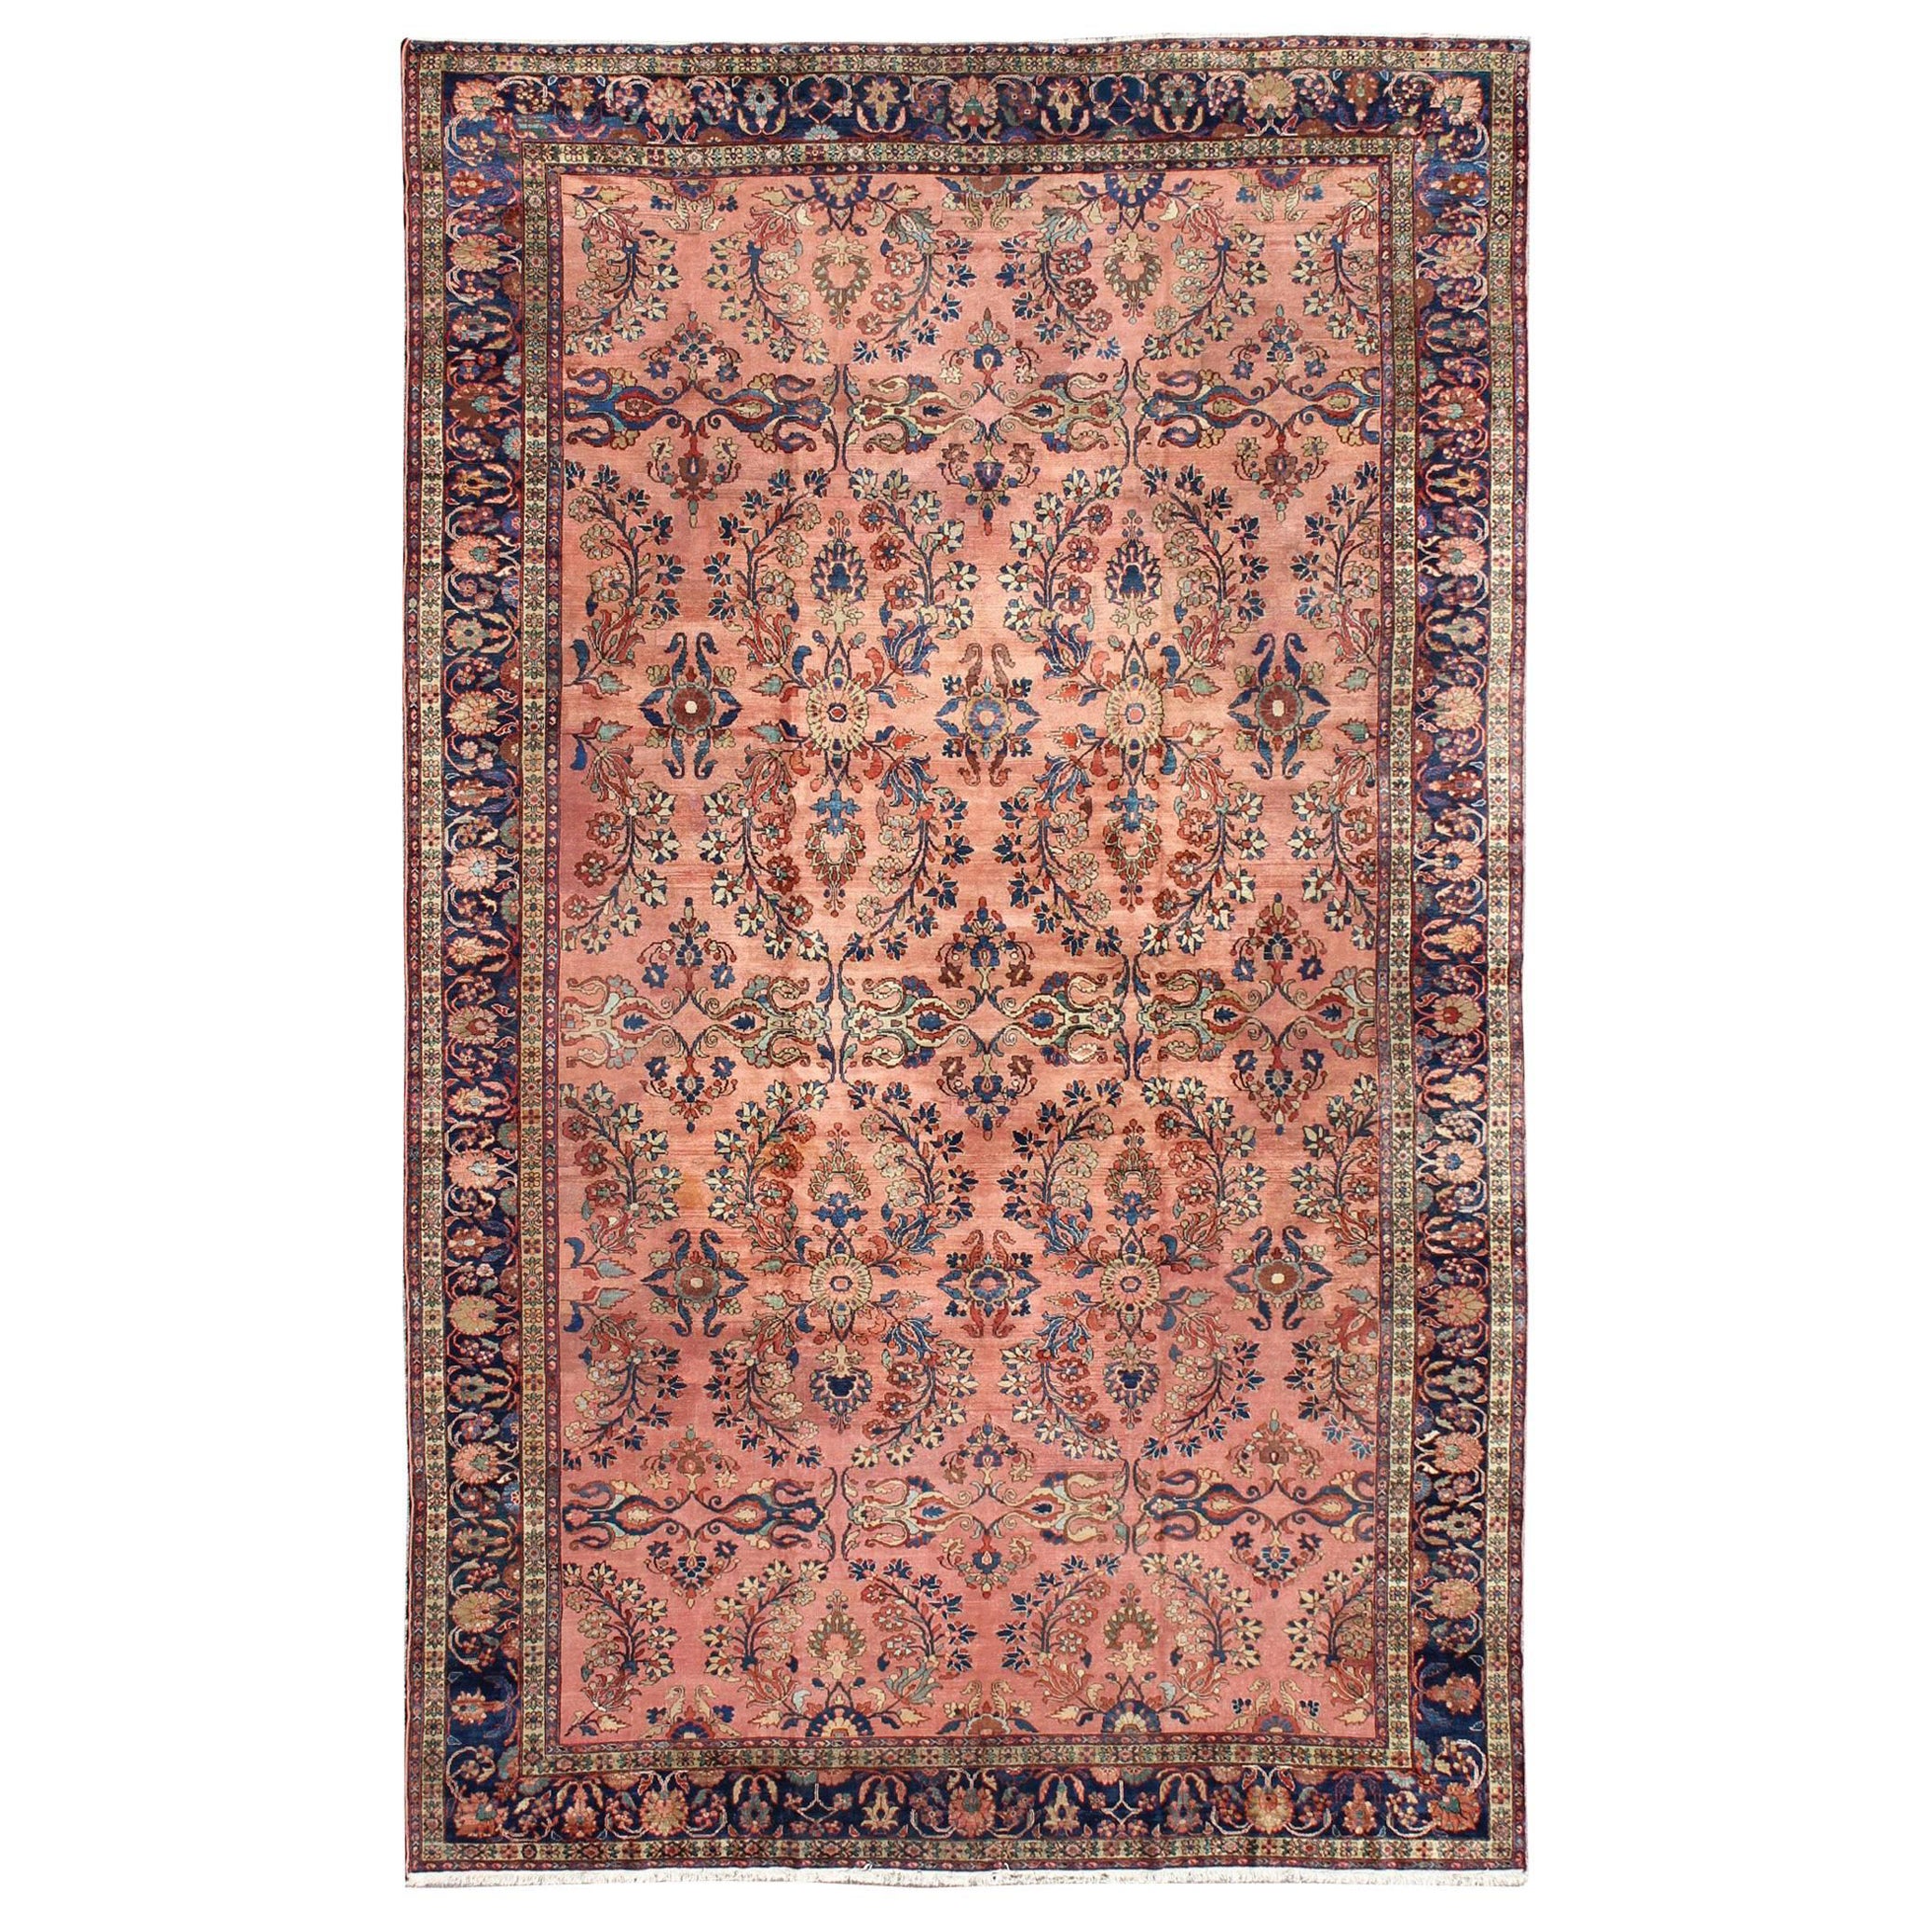 Large Antique Persian Lilihan Rug in Salmon, Blue, Green, Yellow & Rust Colors For Sale